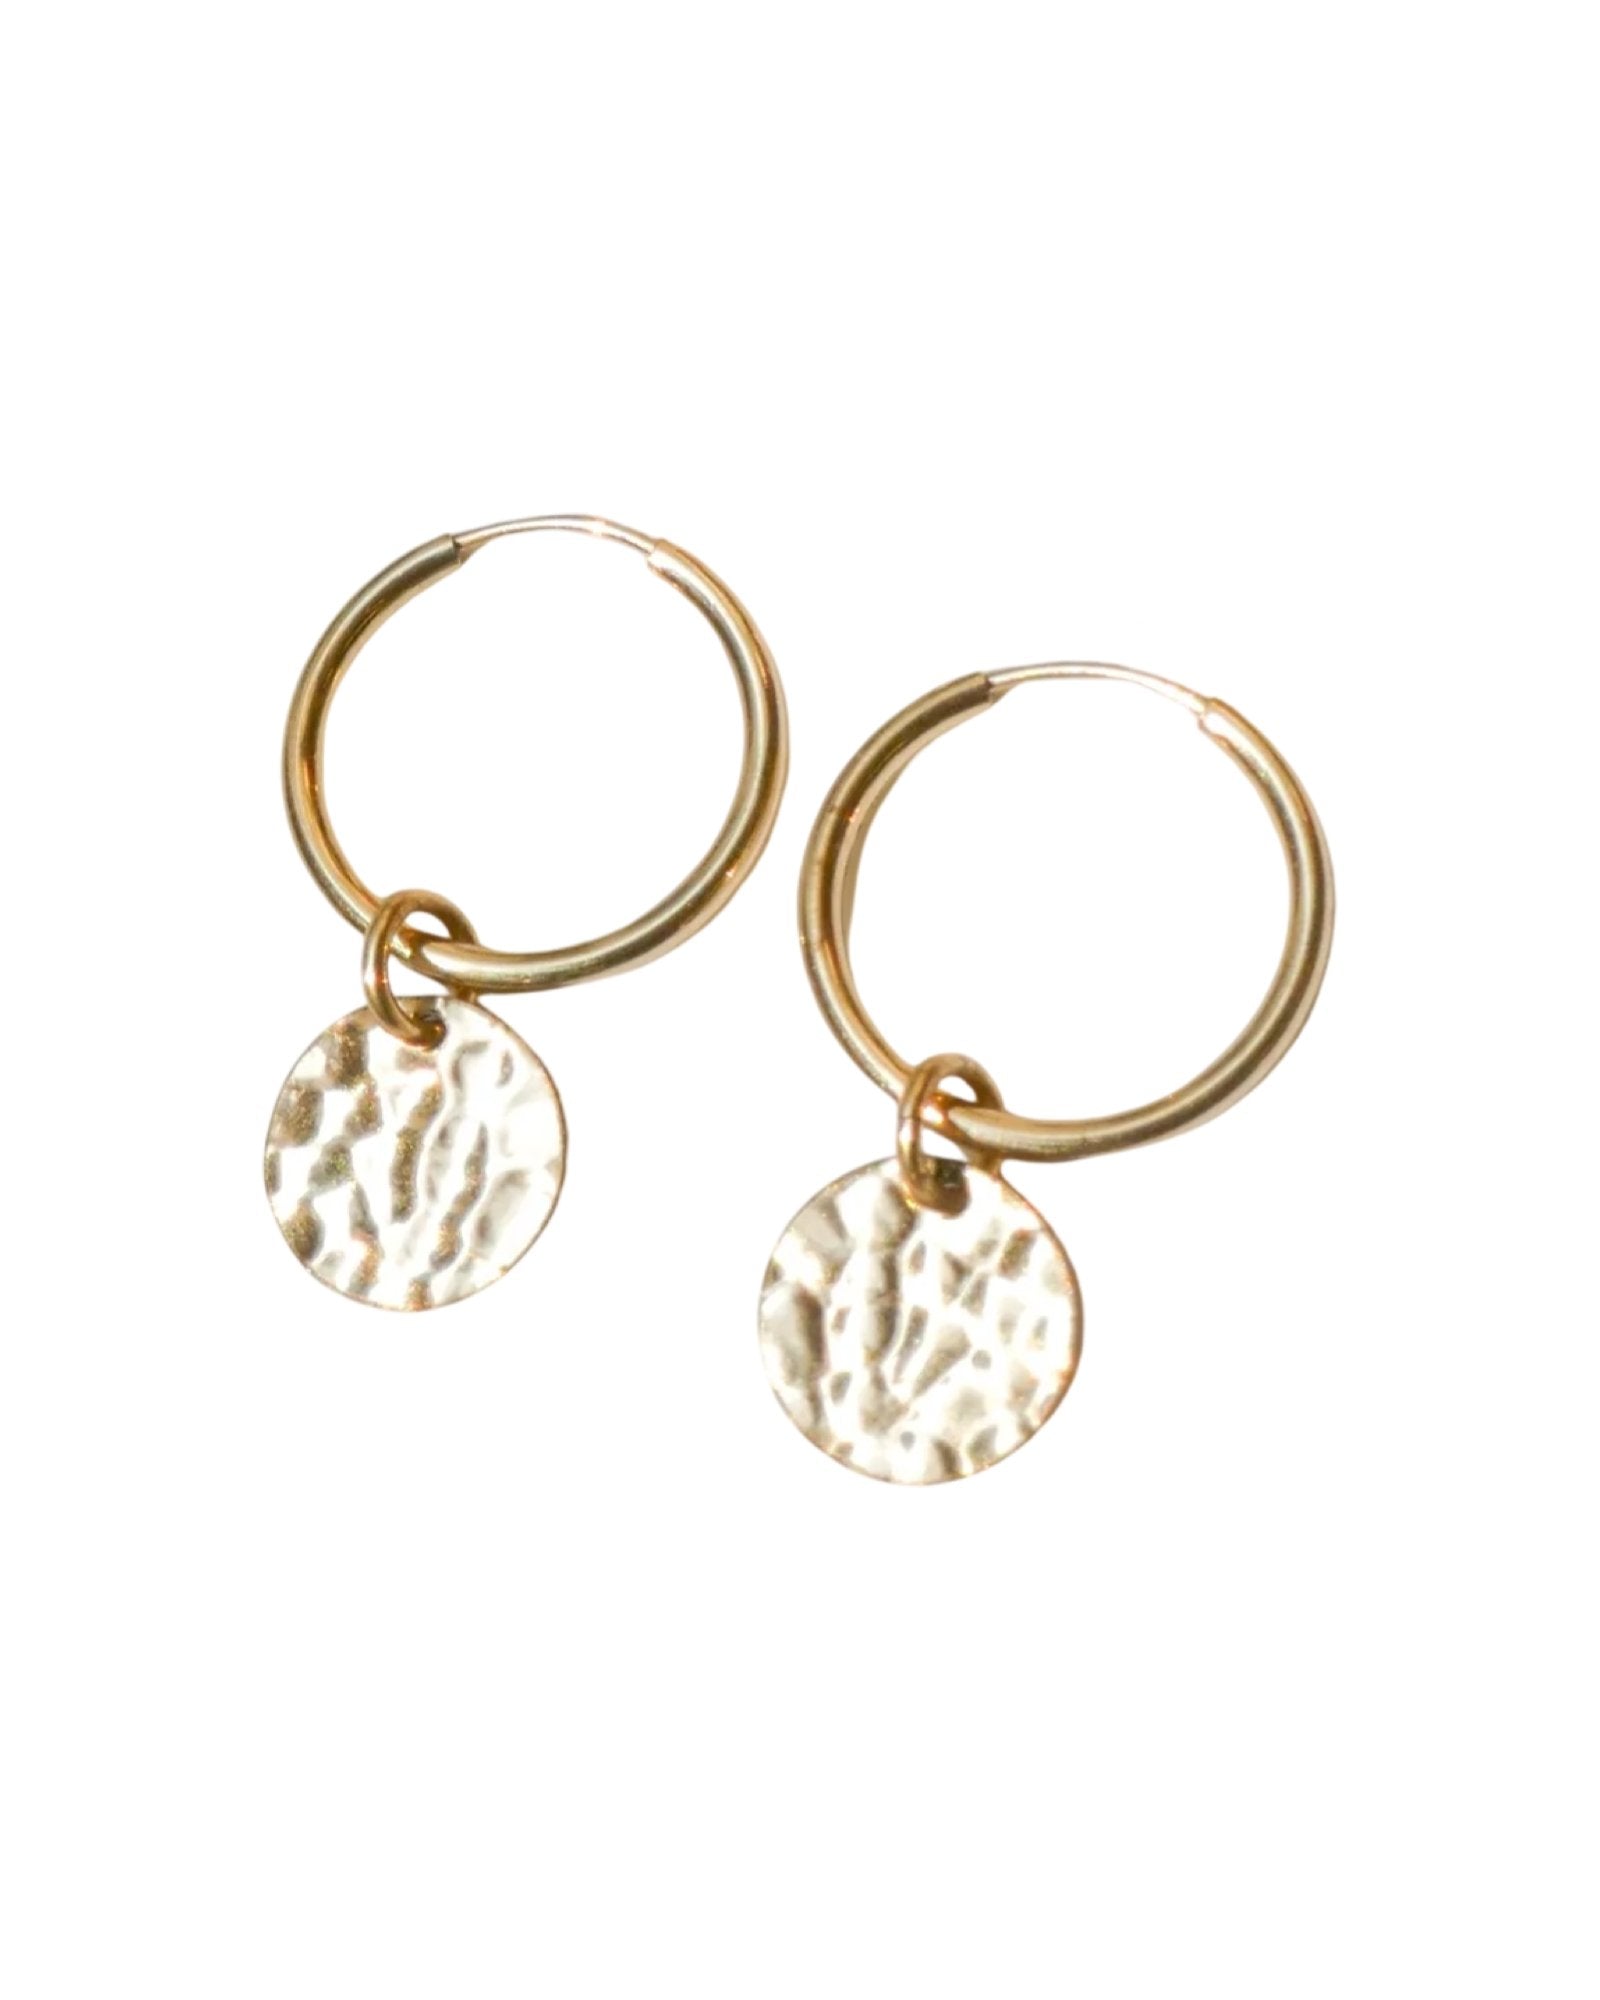 16MM DALEY LUNA HOOPS - DE.FINE Collection Jewelry